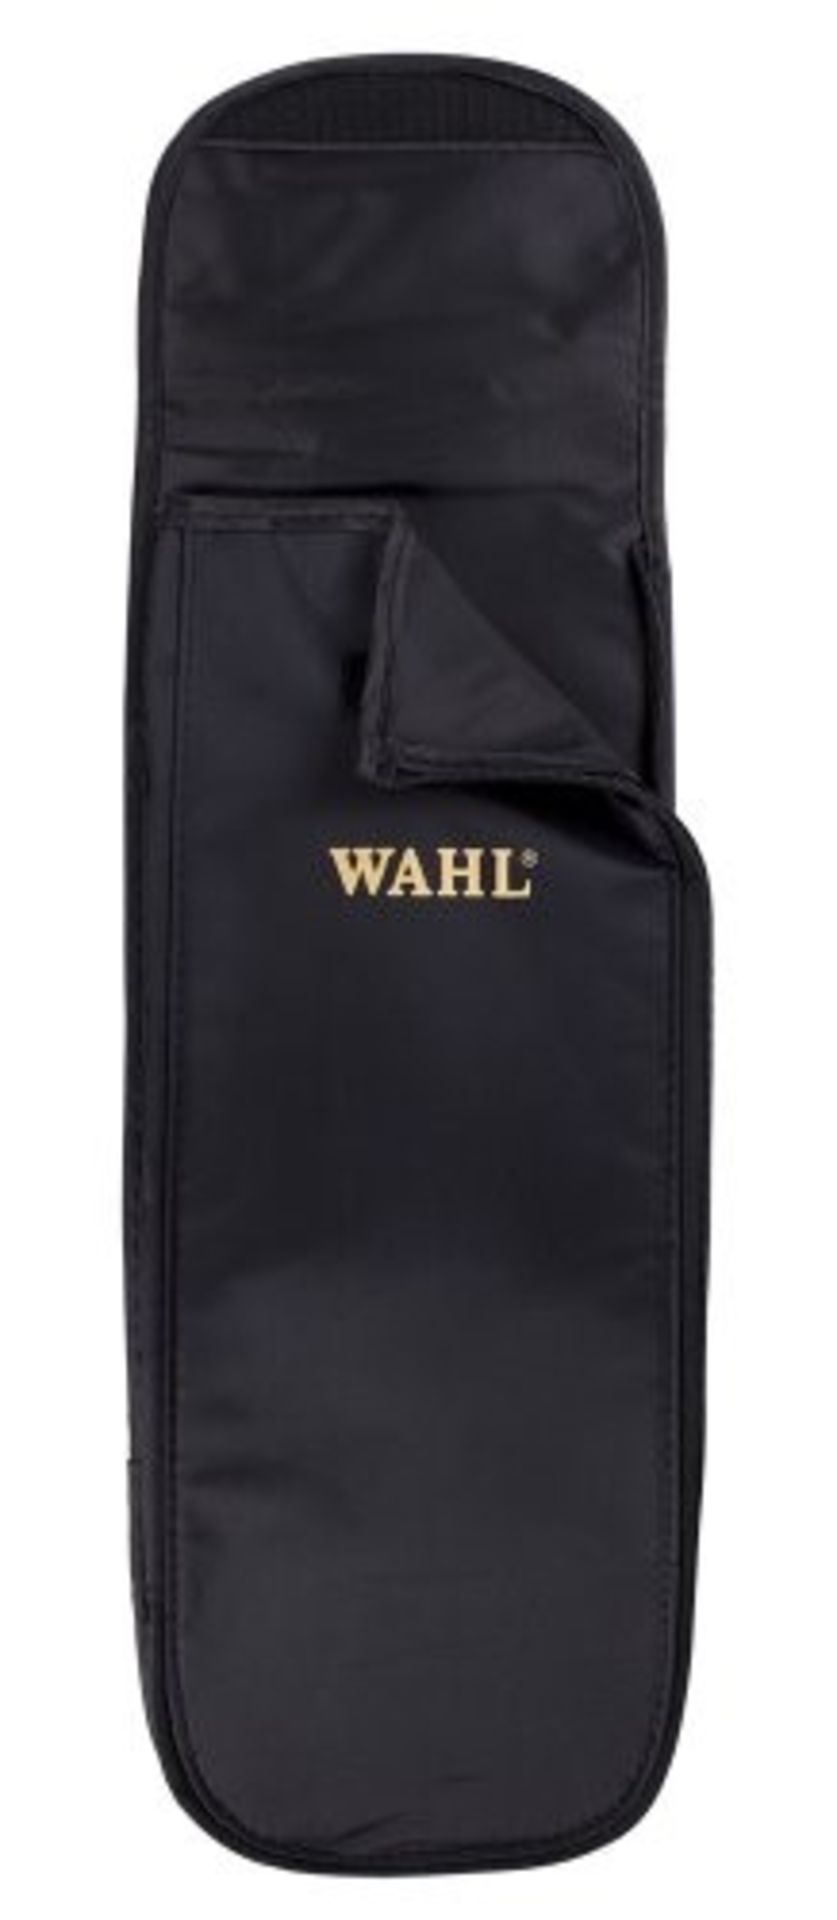 Wahl Heat Mat for Hair Straighteners, Use As A Mat or A Pouch To Store Appliances